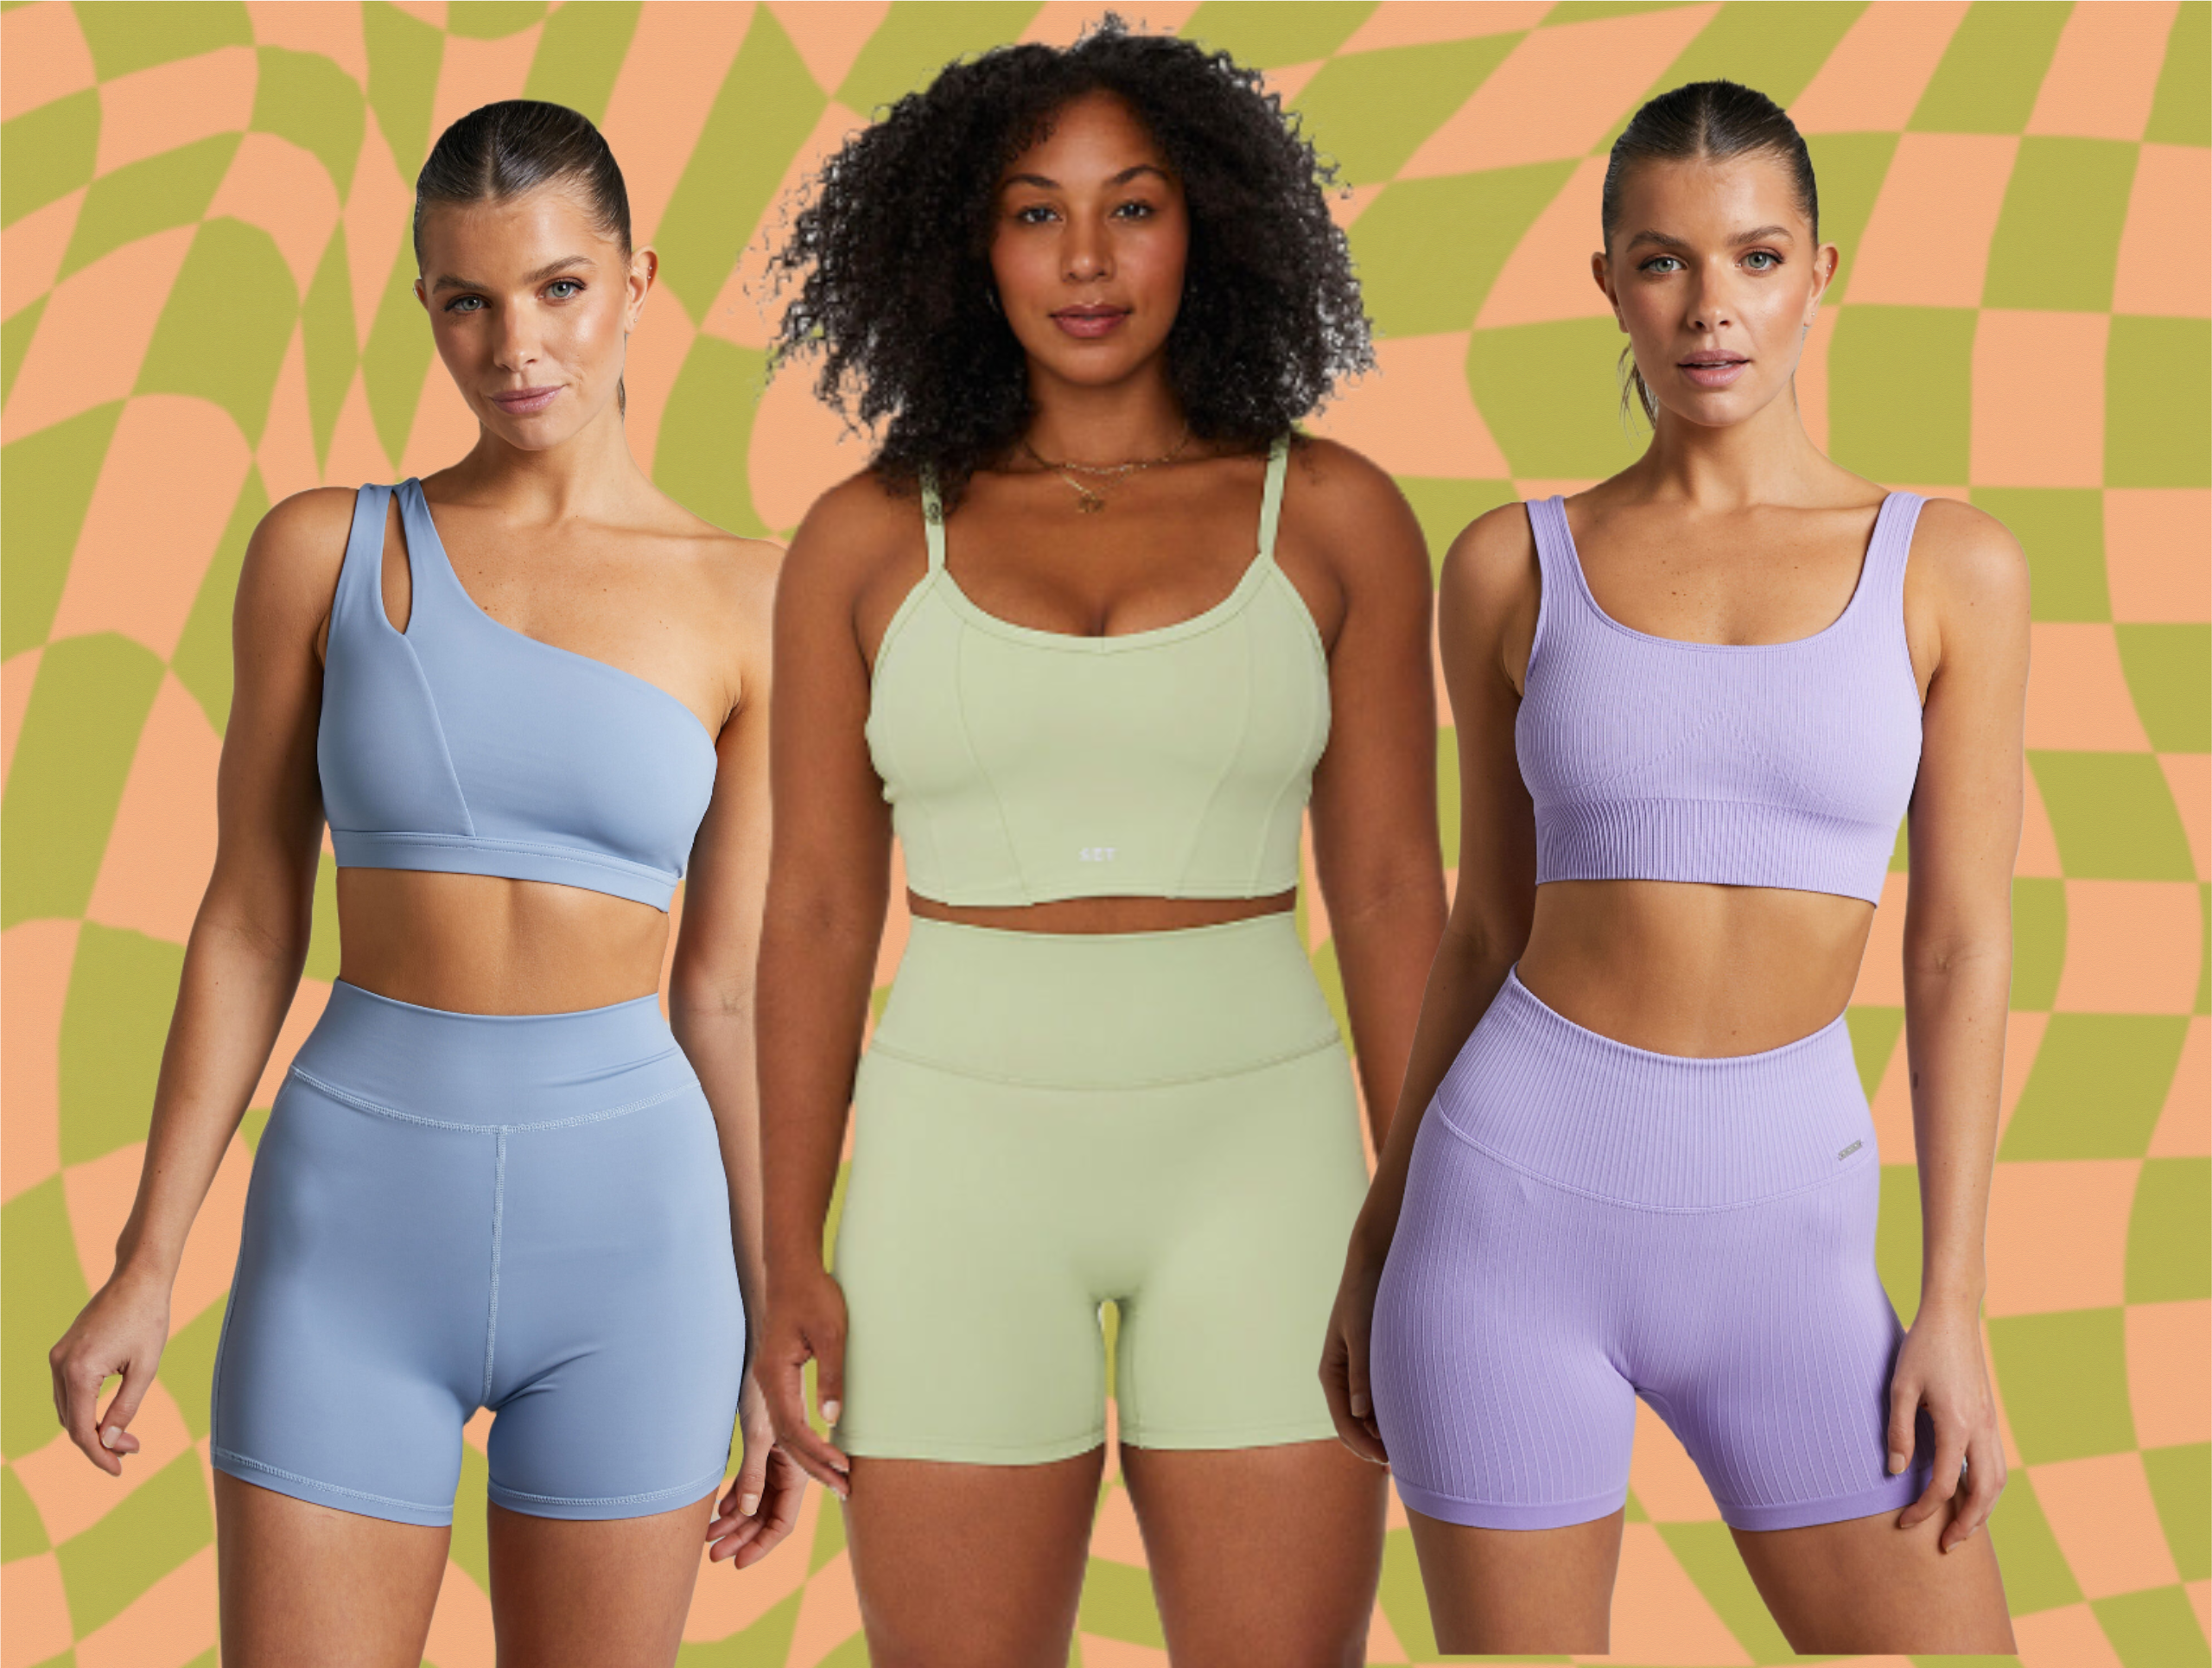 Mix and match! Our sports bra matches shorts & leggings, so you